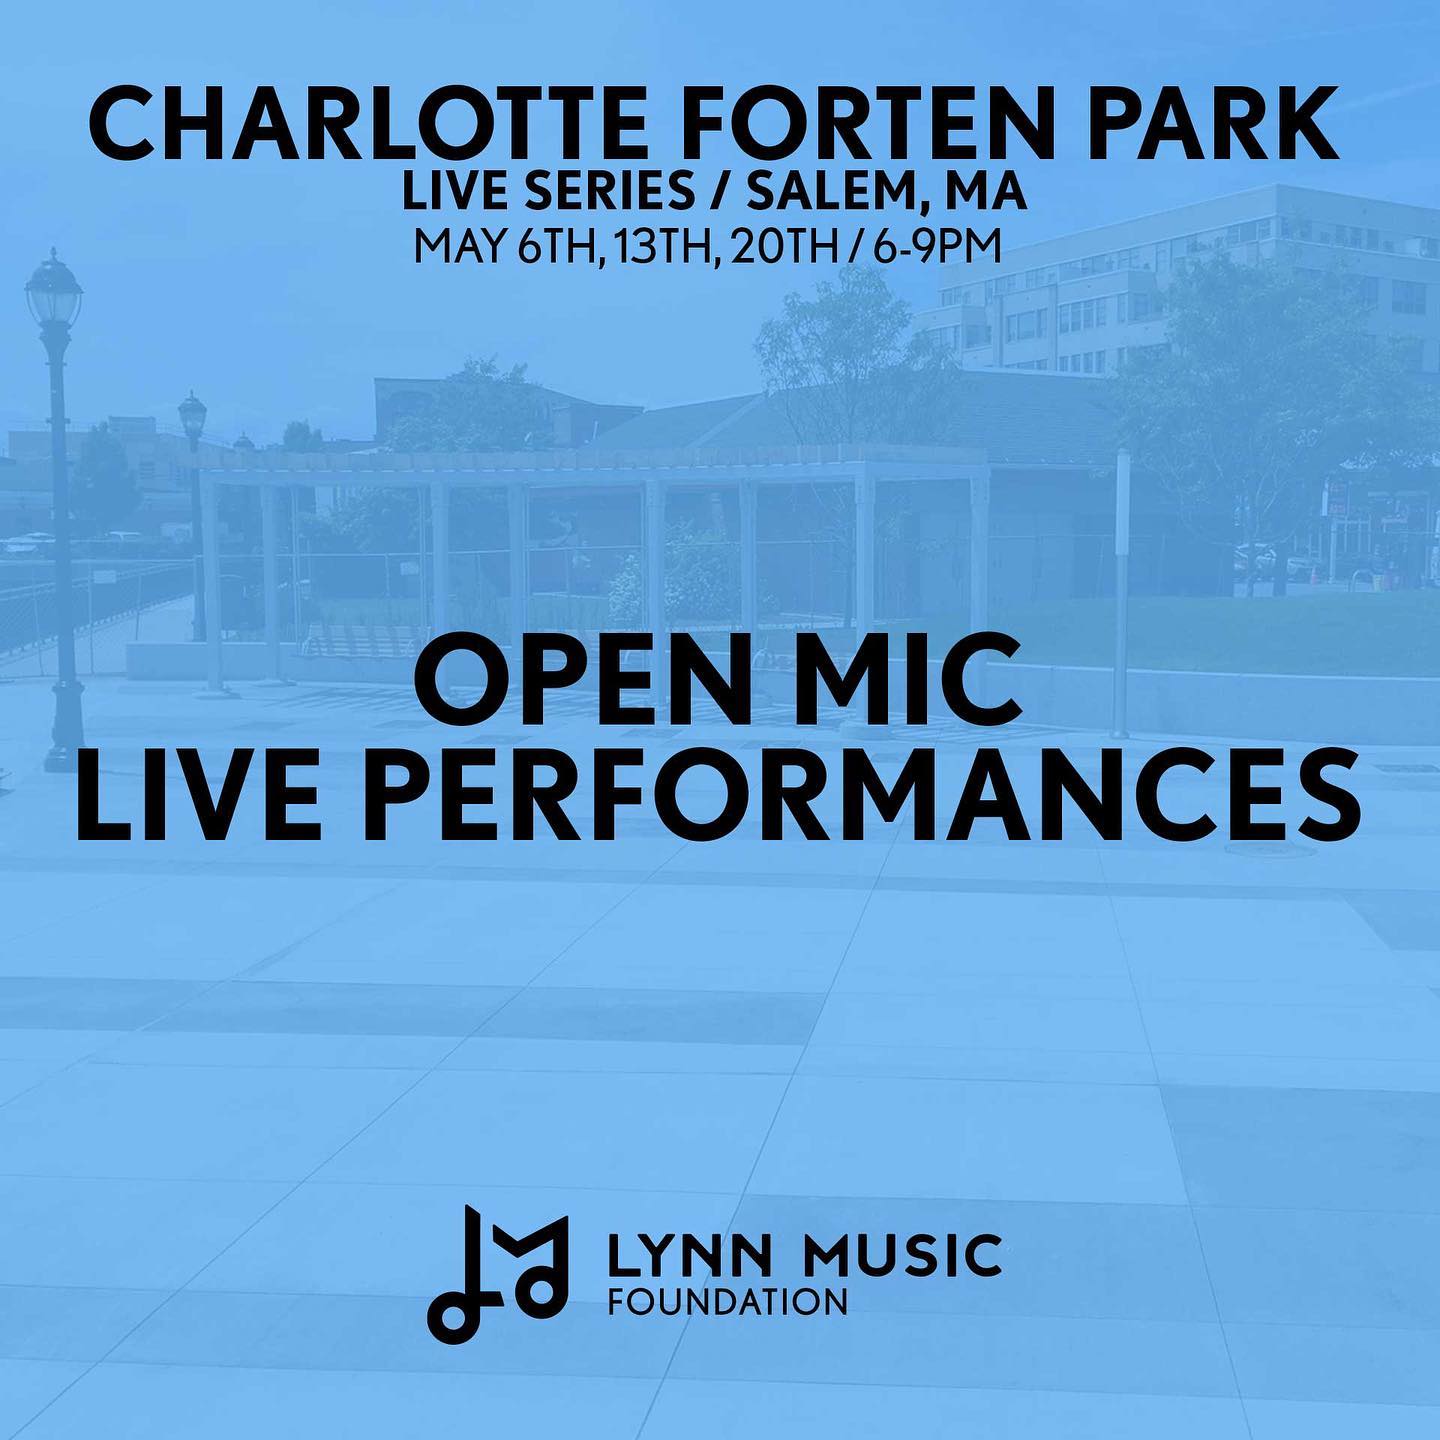 a poster for charlotte forten park's open mic live performance.